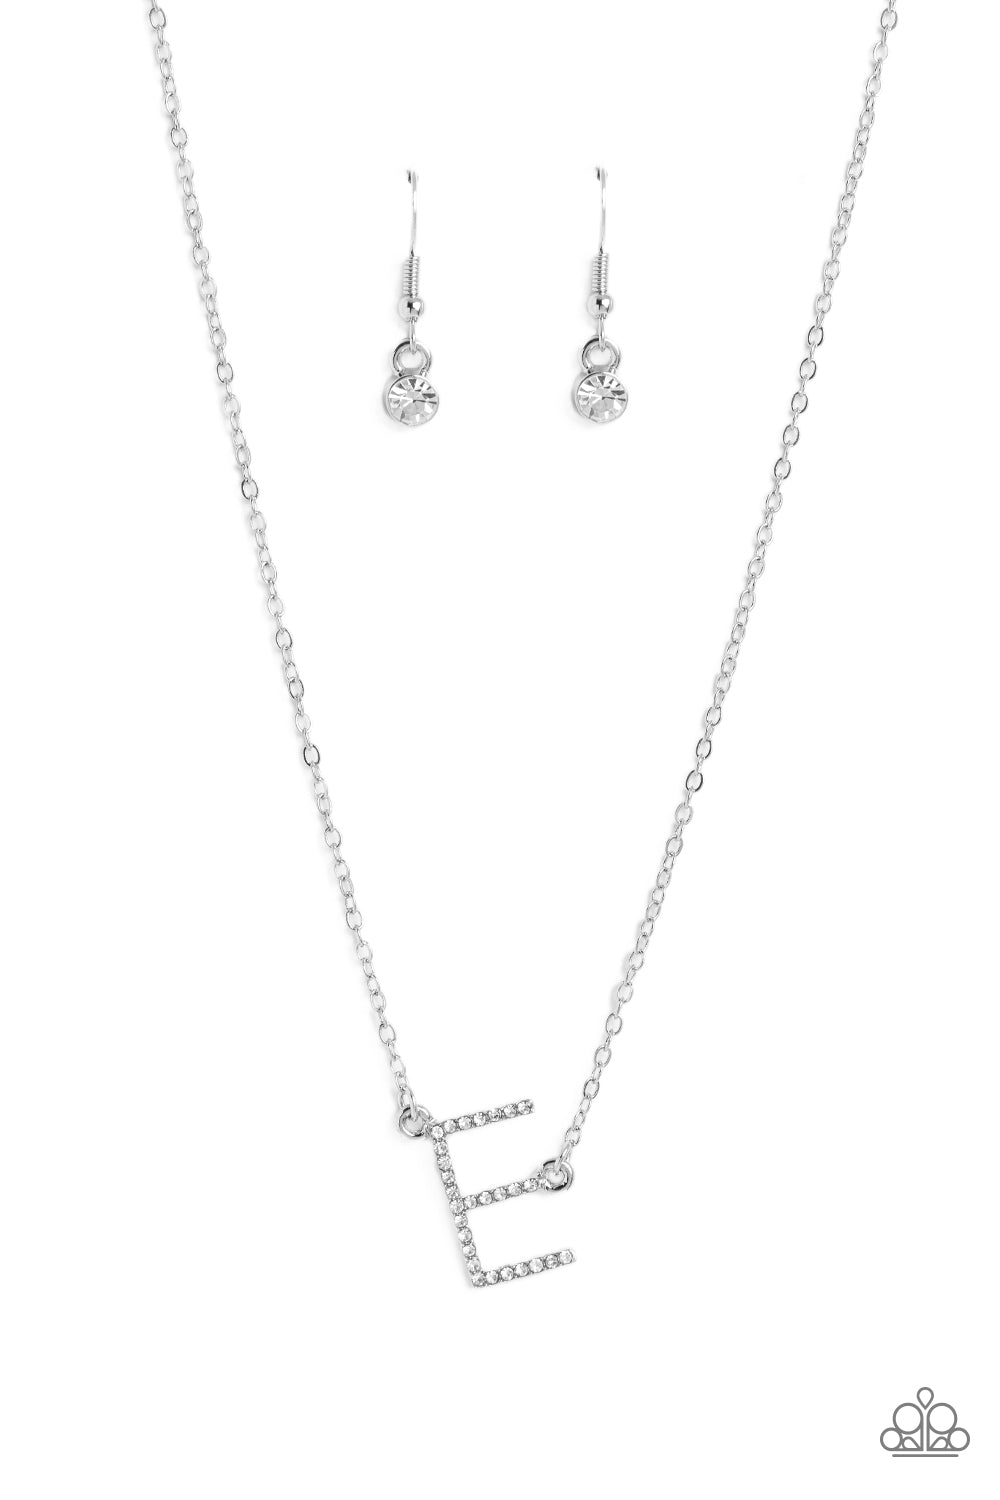 Paparazzi Necklaces - INITIALLY Yours - E - White